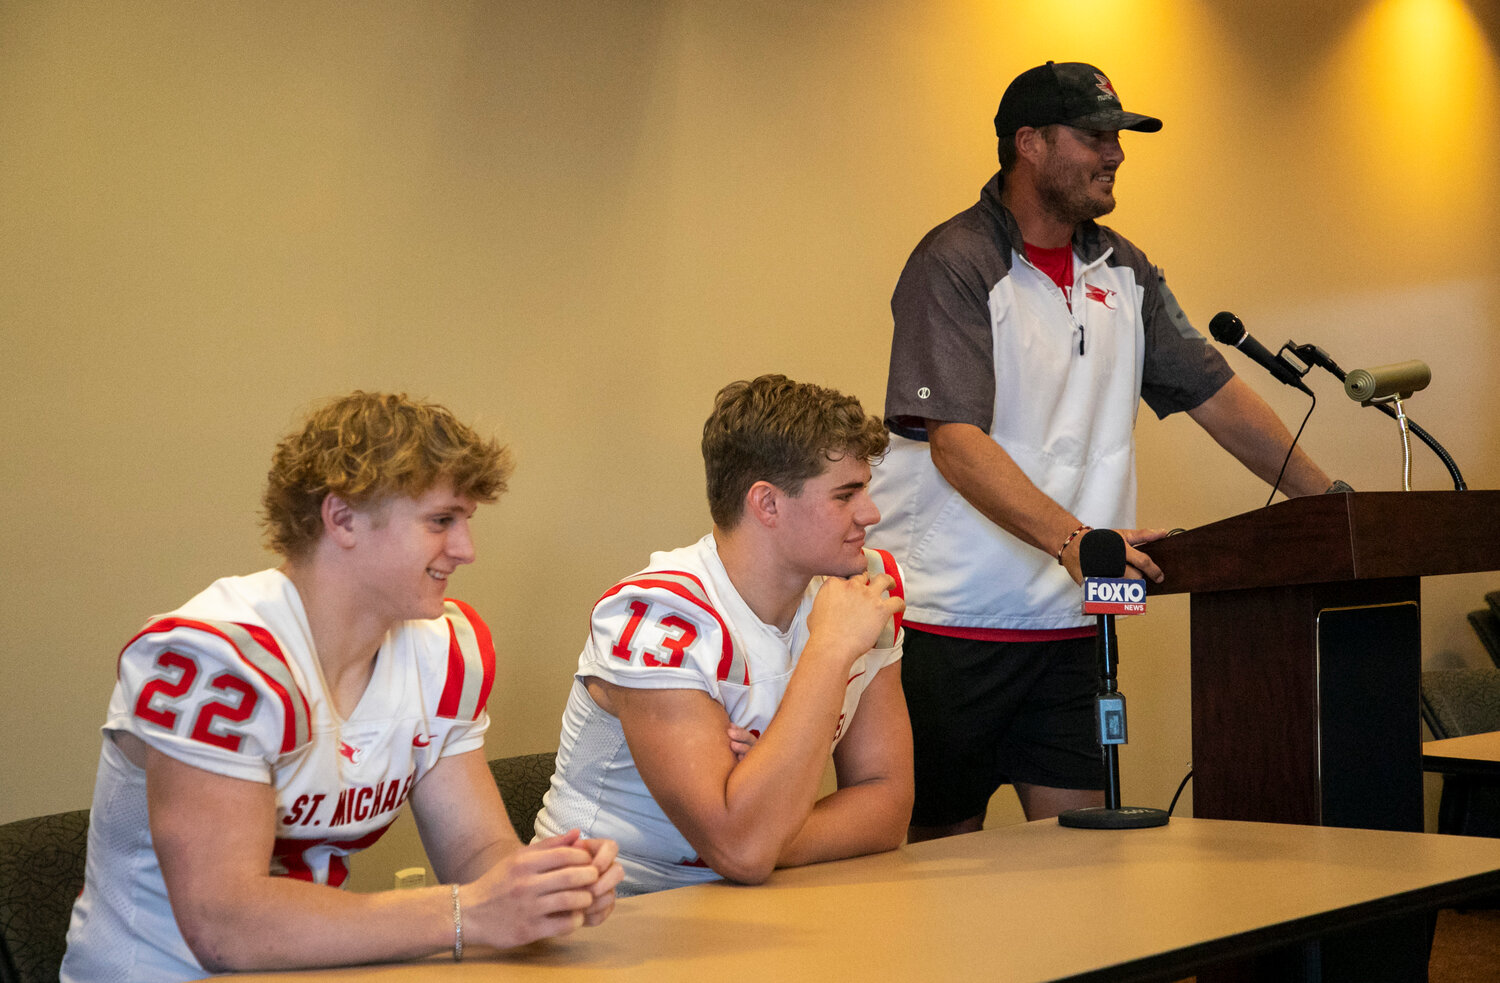 The St. Michael Catholic Cardinals were represented by Martin Corte, Zach Taylor and head coach Philip Rivers at Baldwin County Media Days in Daphne on July 31. Entering Rivers’ third year at the helm, he has already seen a shift in the gameday mentality amongst the team.